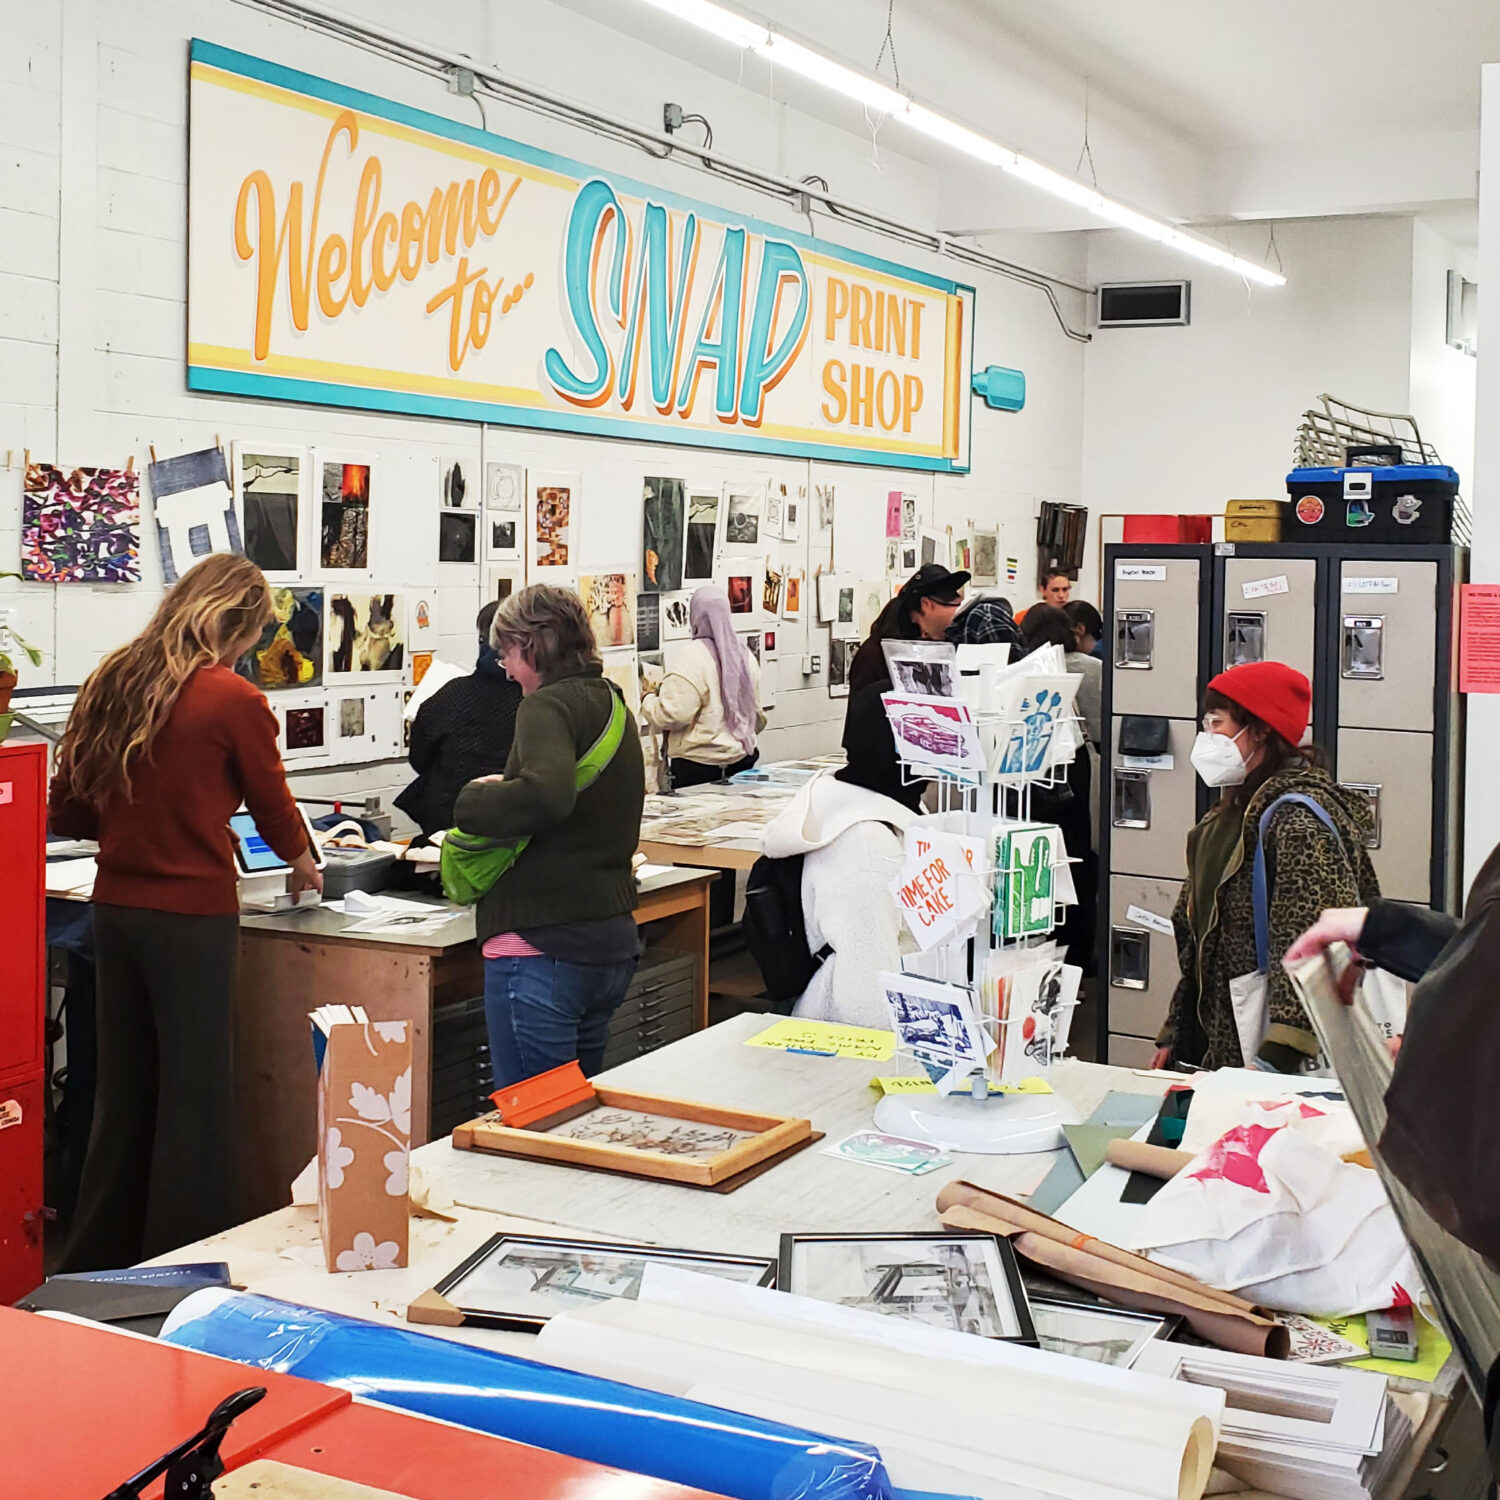 A photo of the Garage Sale taking place in the printshop, with artwork on all the walls and tables, and people browsing through them.